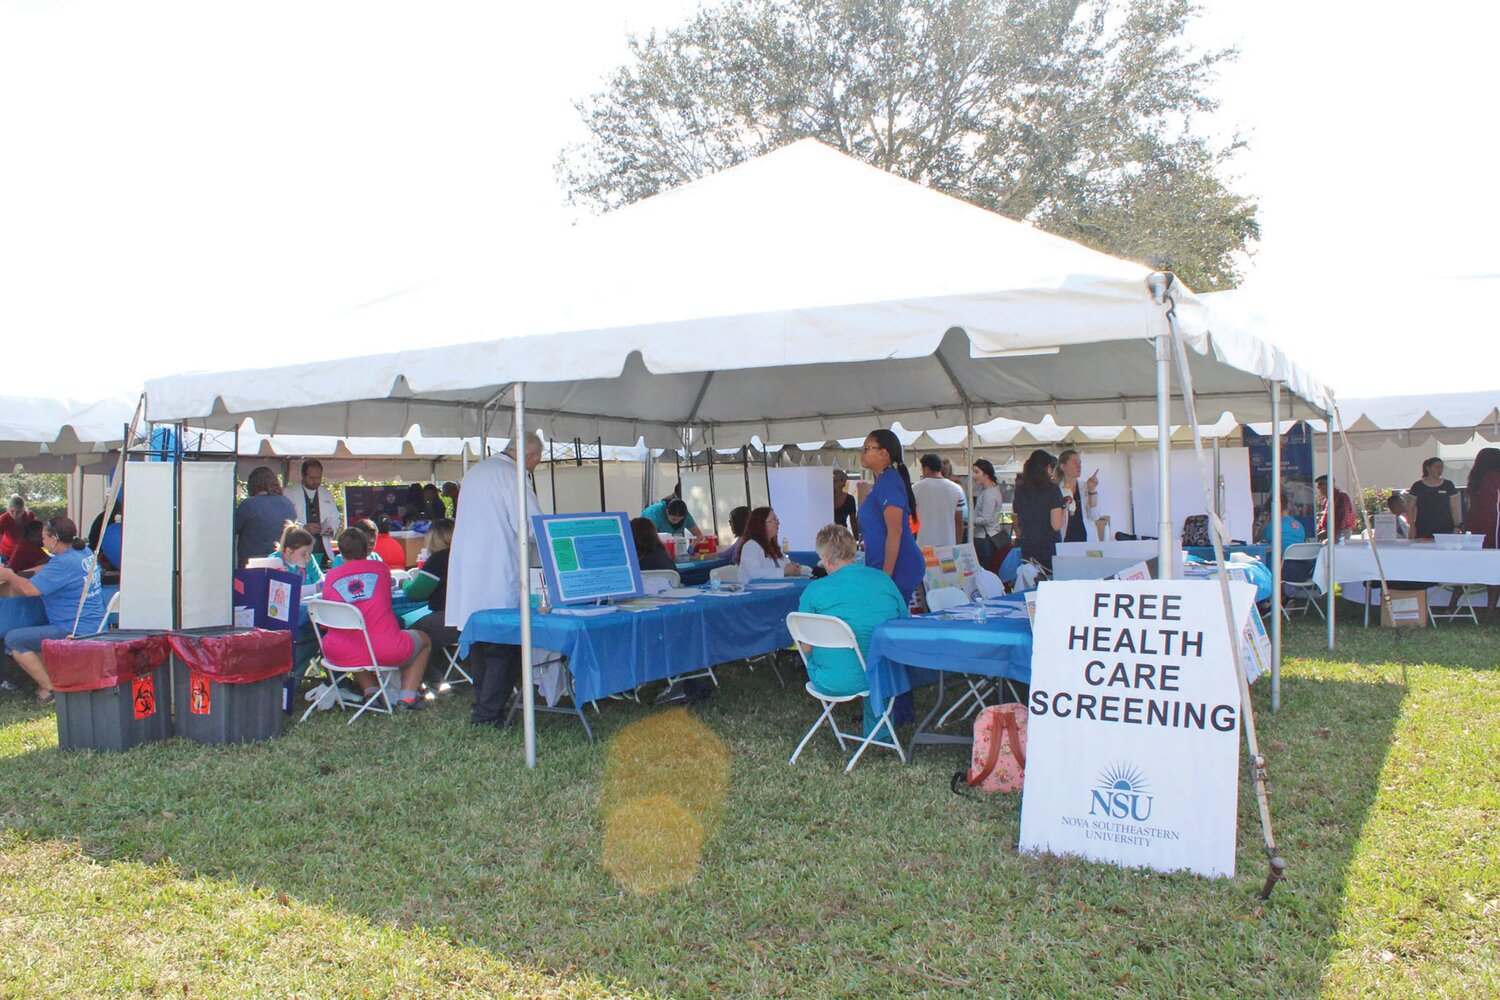 The free health fair aims to provide vital health services and foster a sense of togetherness among the residents of Hendry and Glades counties.